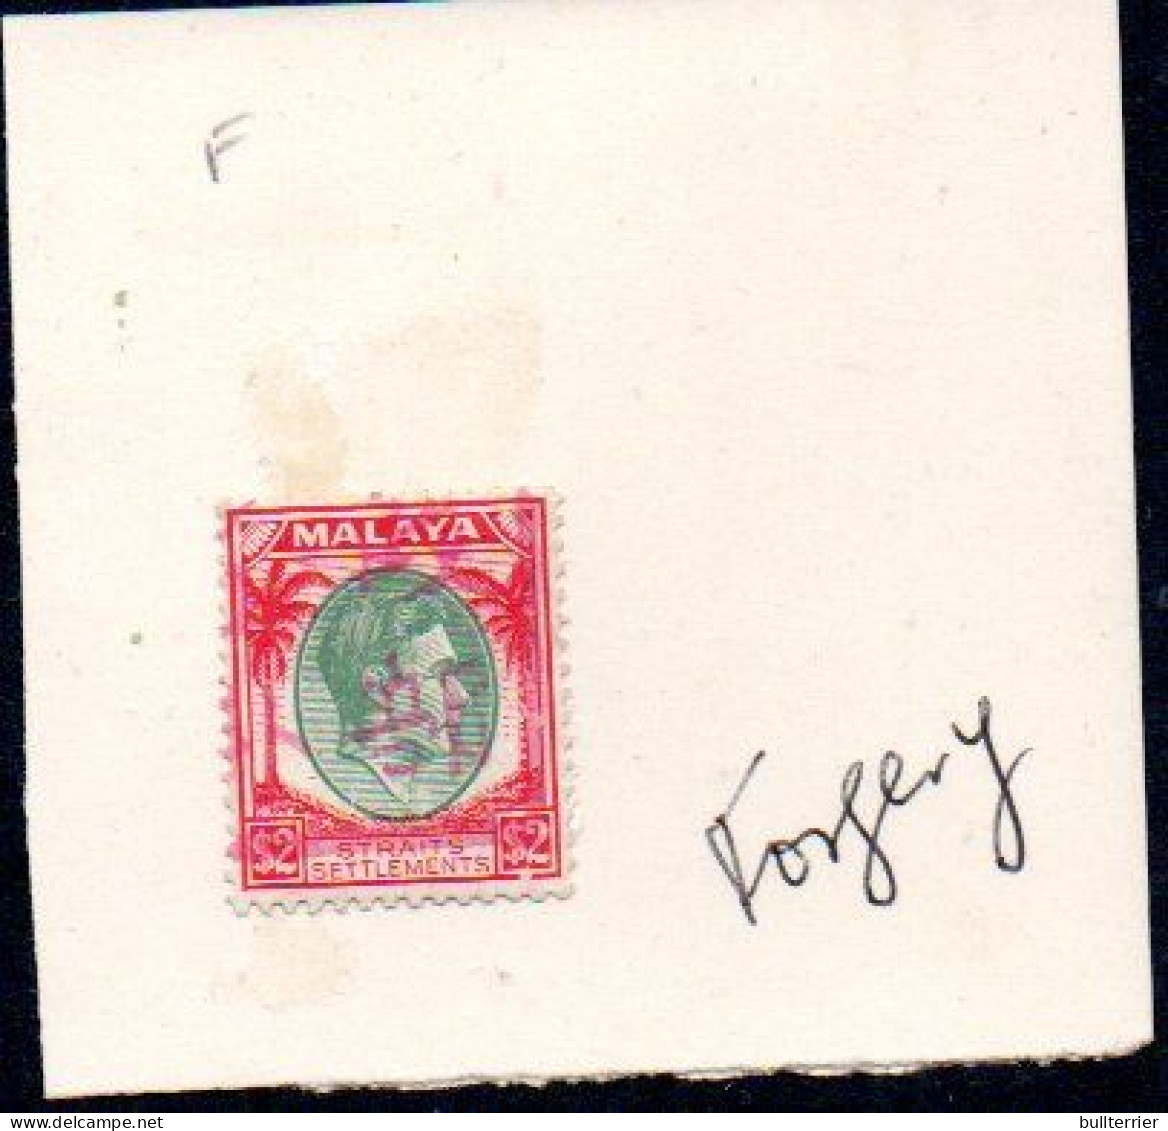 STRAITS SETTLEMENTS - JAP OCCUPATION $2 GREEN AND RED  MH / ORGINAL GUM   "  FORGERY" - Straits Settlements